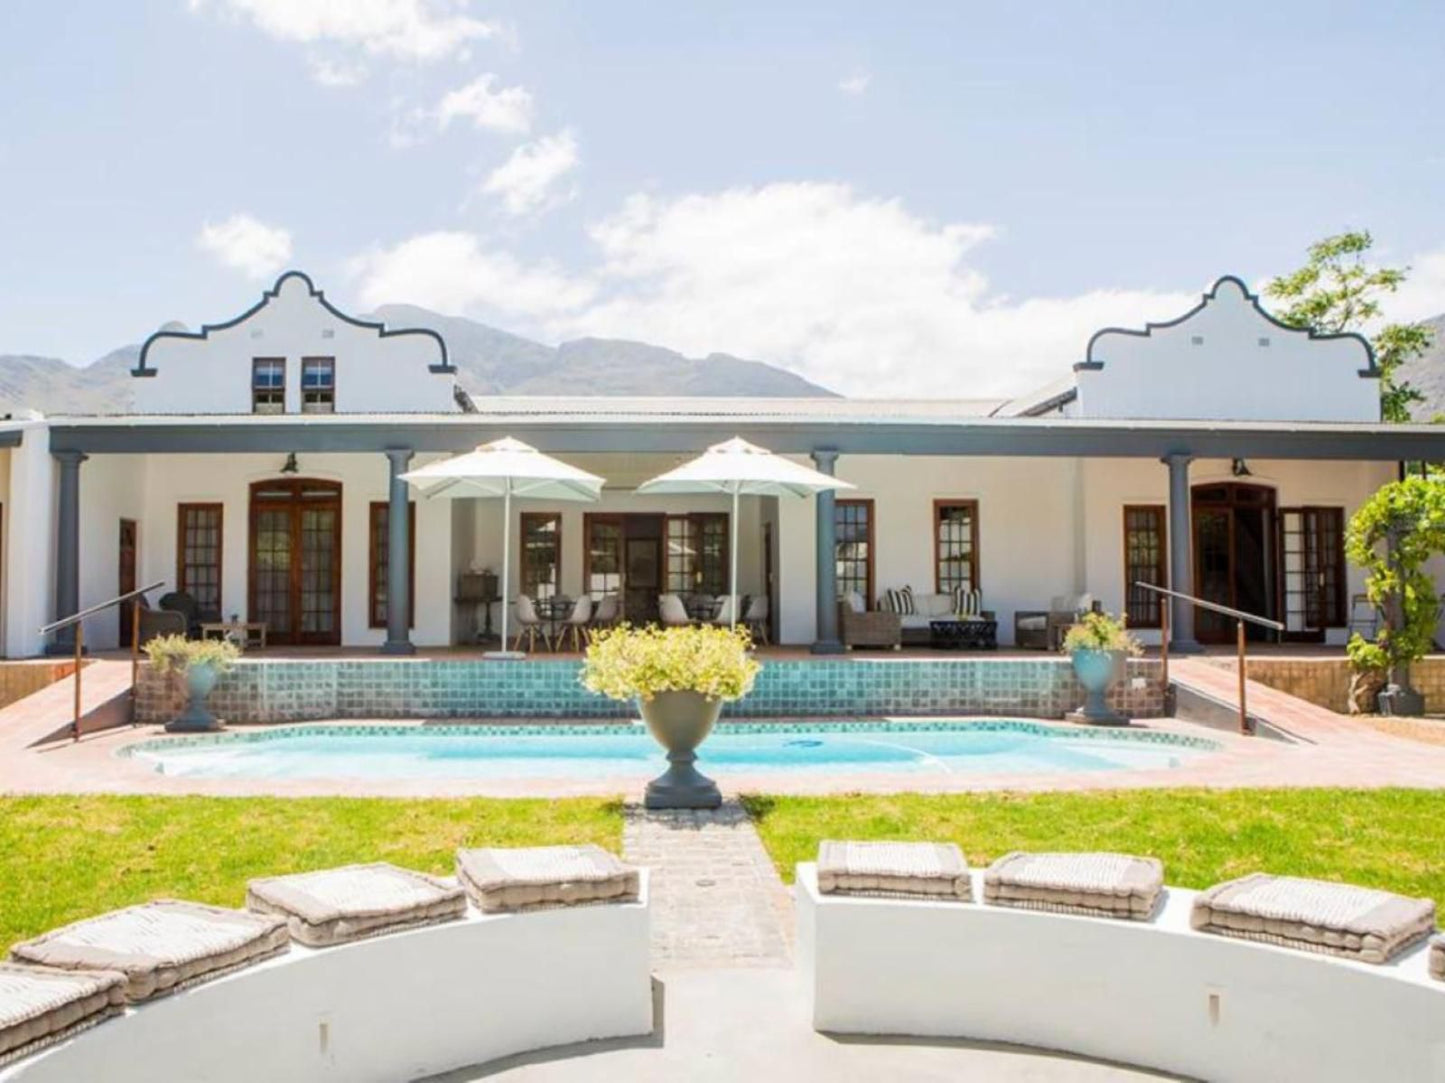 Mont D Or Franschhoek Franschhoek Western Cape South Africa House, Building, Architecture, Swimming Pool